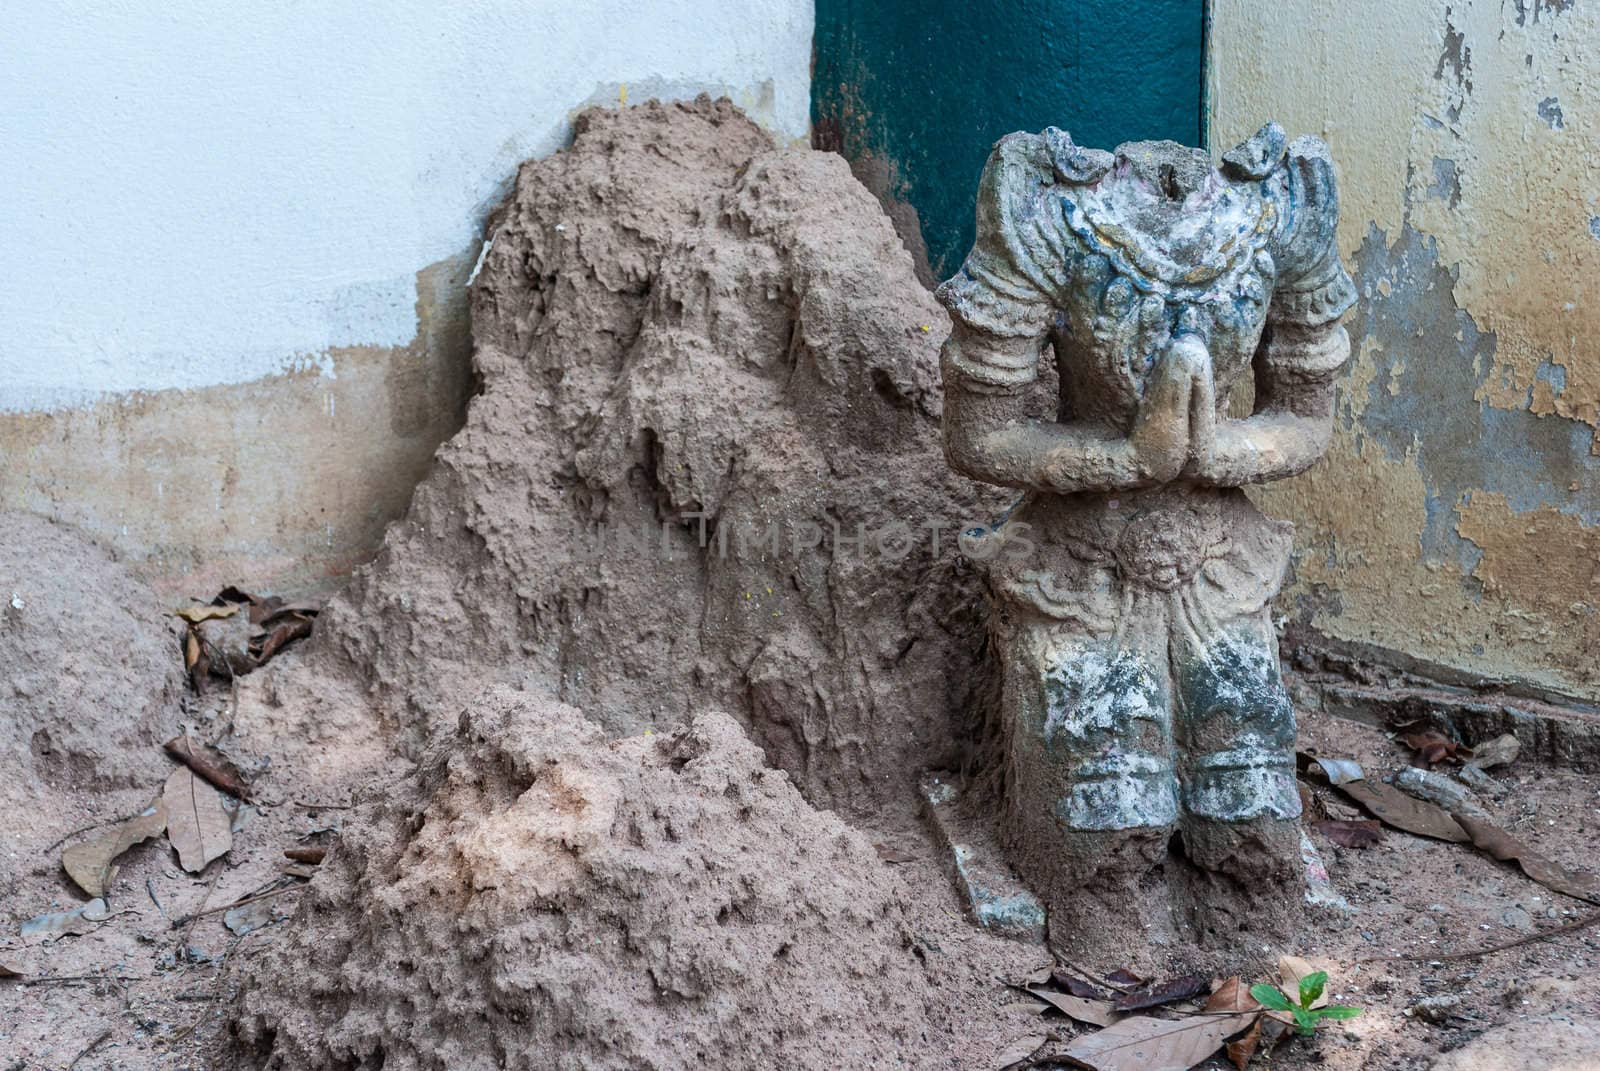 Abandoned headless male deity who protects religious at Paa Jareon Tham temple, Chiangmai, Thailand